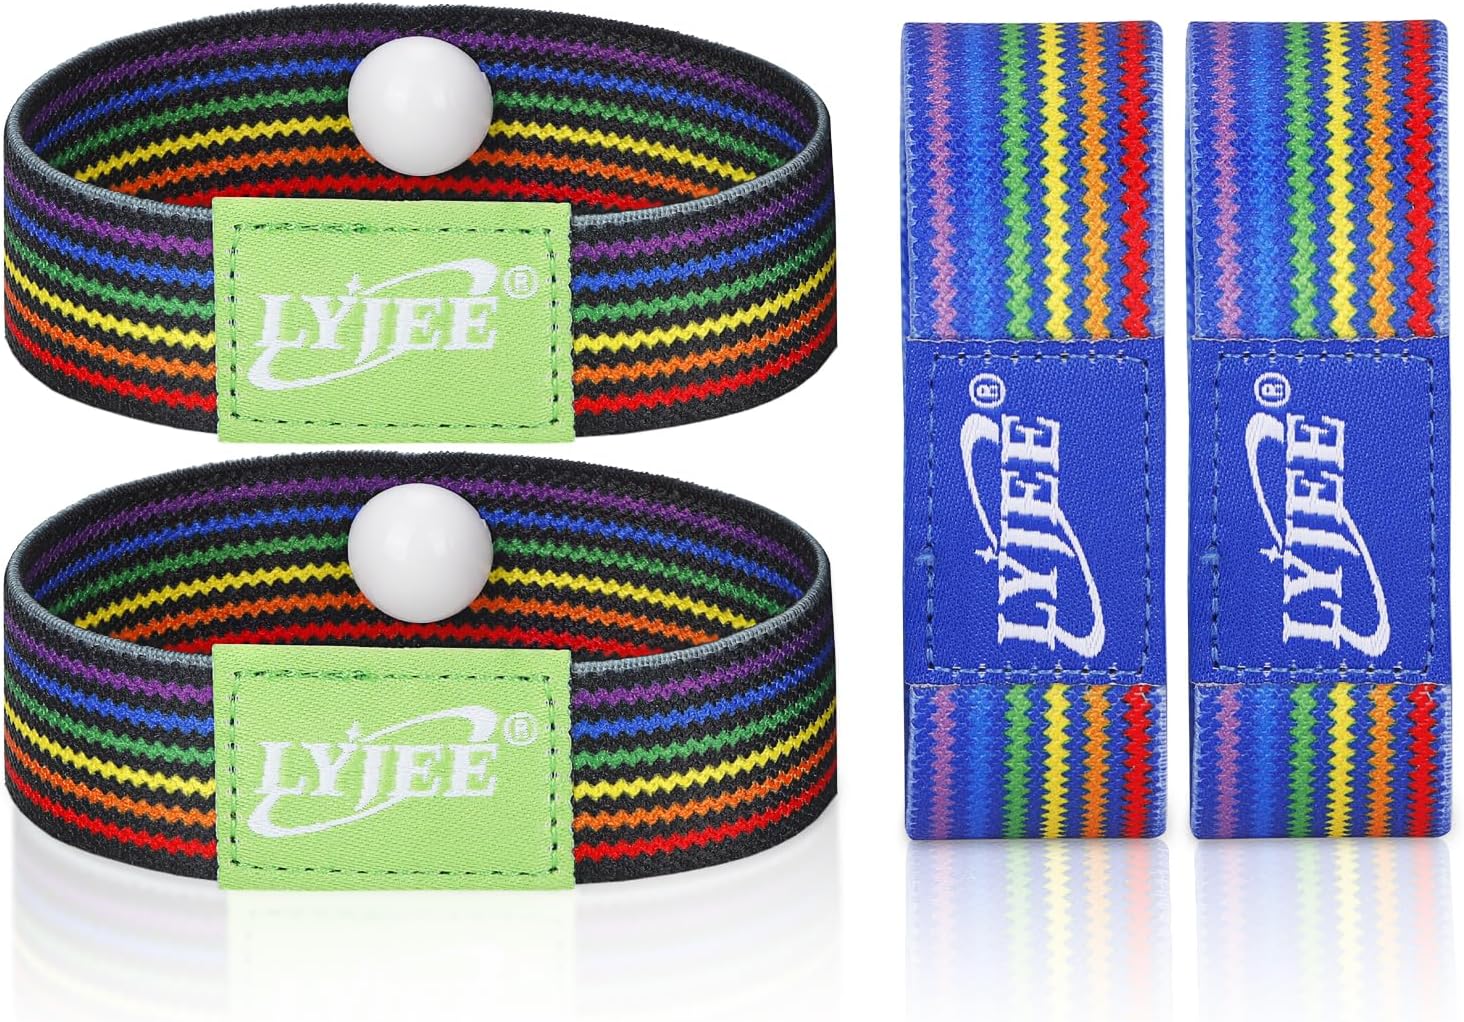 LYJEE Nausea Wristbands, Motion Sickness Band for Pregnancy, Acupressure Wristband for Nausea or Morning Sickness